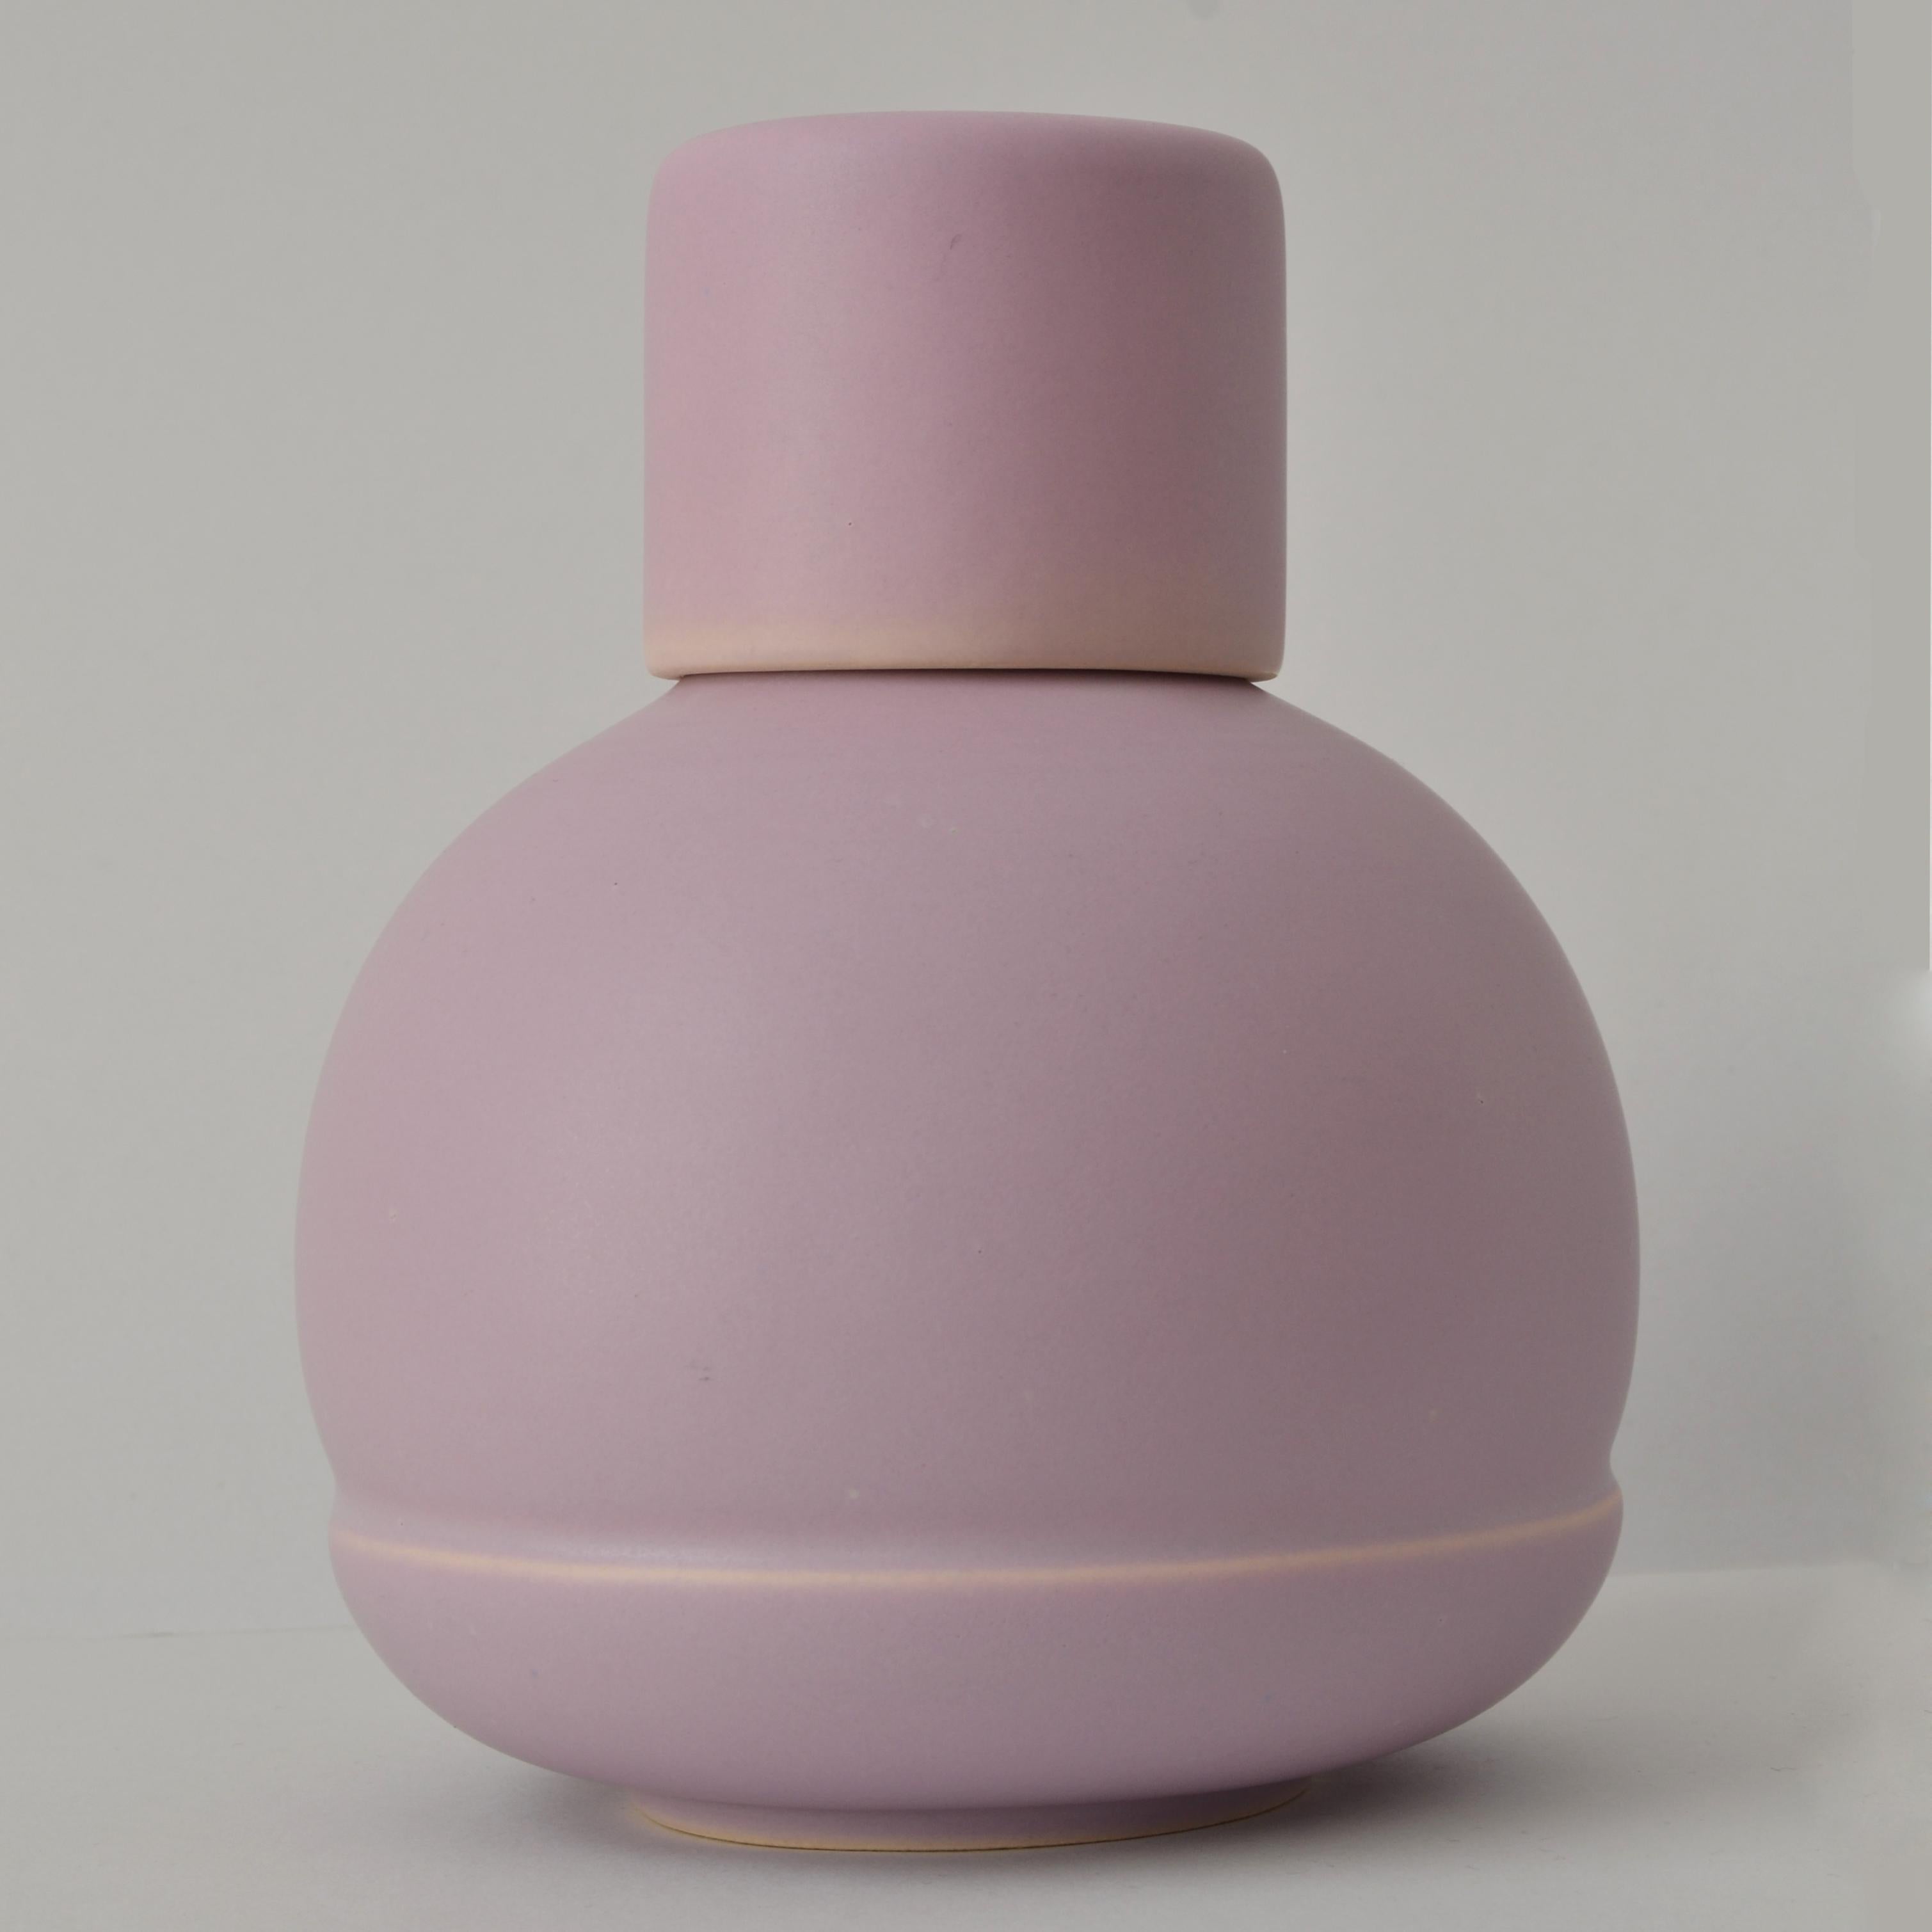 Small lilac bottle by Omar Ortiz, 2021
Dimensions: H13 x W15cm
Materials: High Temperature Ceramics. 

La Muerte Tiene Permiso Collection
In pre-Hispanic cultures it was believed that the mountains were home to the gods. The pyramids repeated